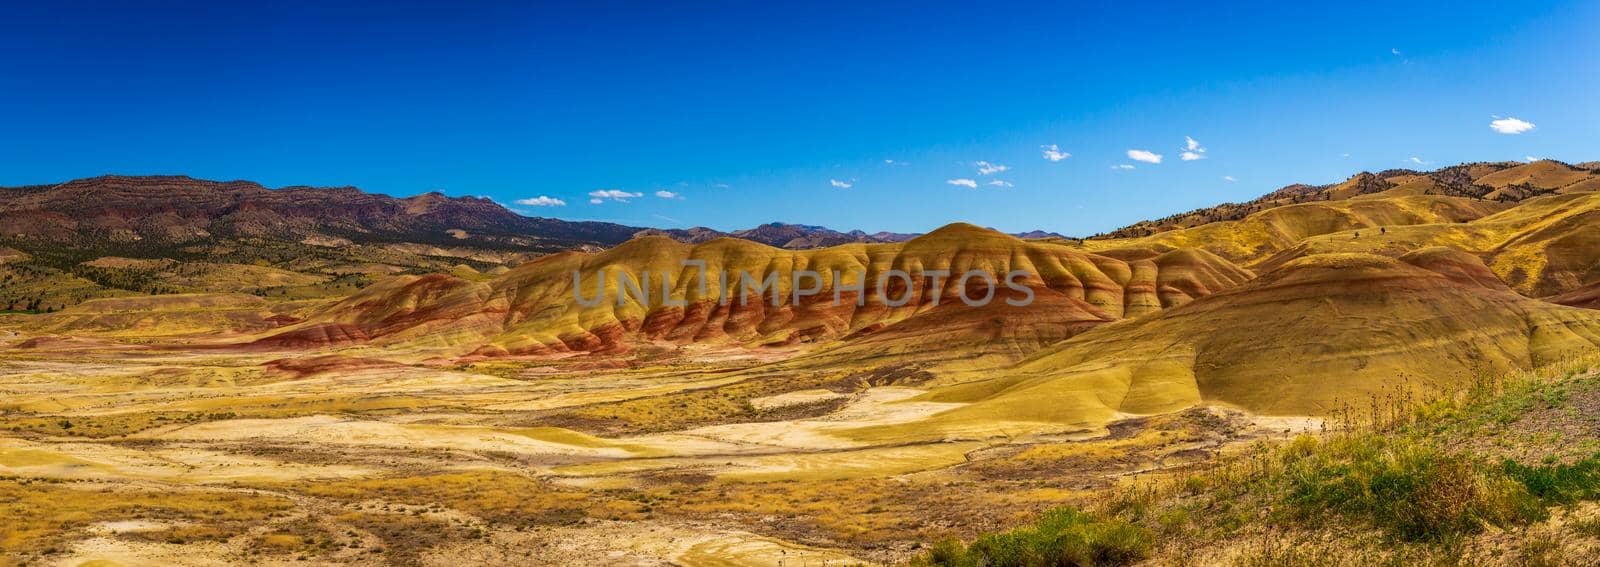 Painted Hills National Monument, in Mitchell Oregon, colorful layers show geological eras.